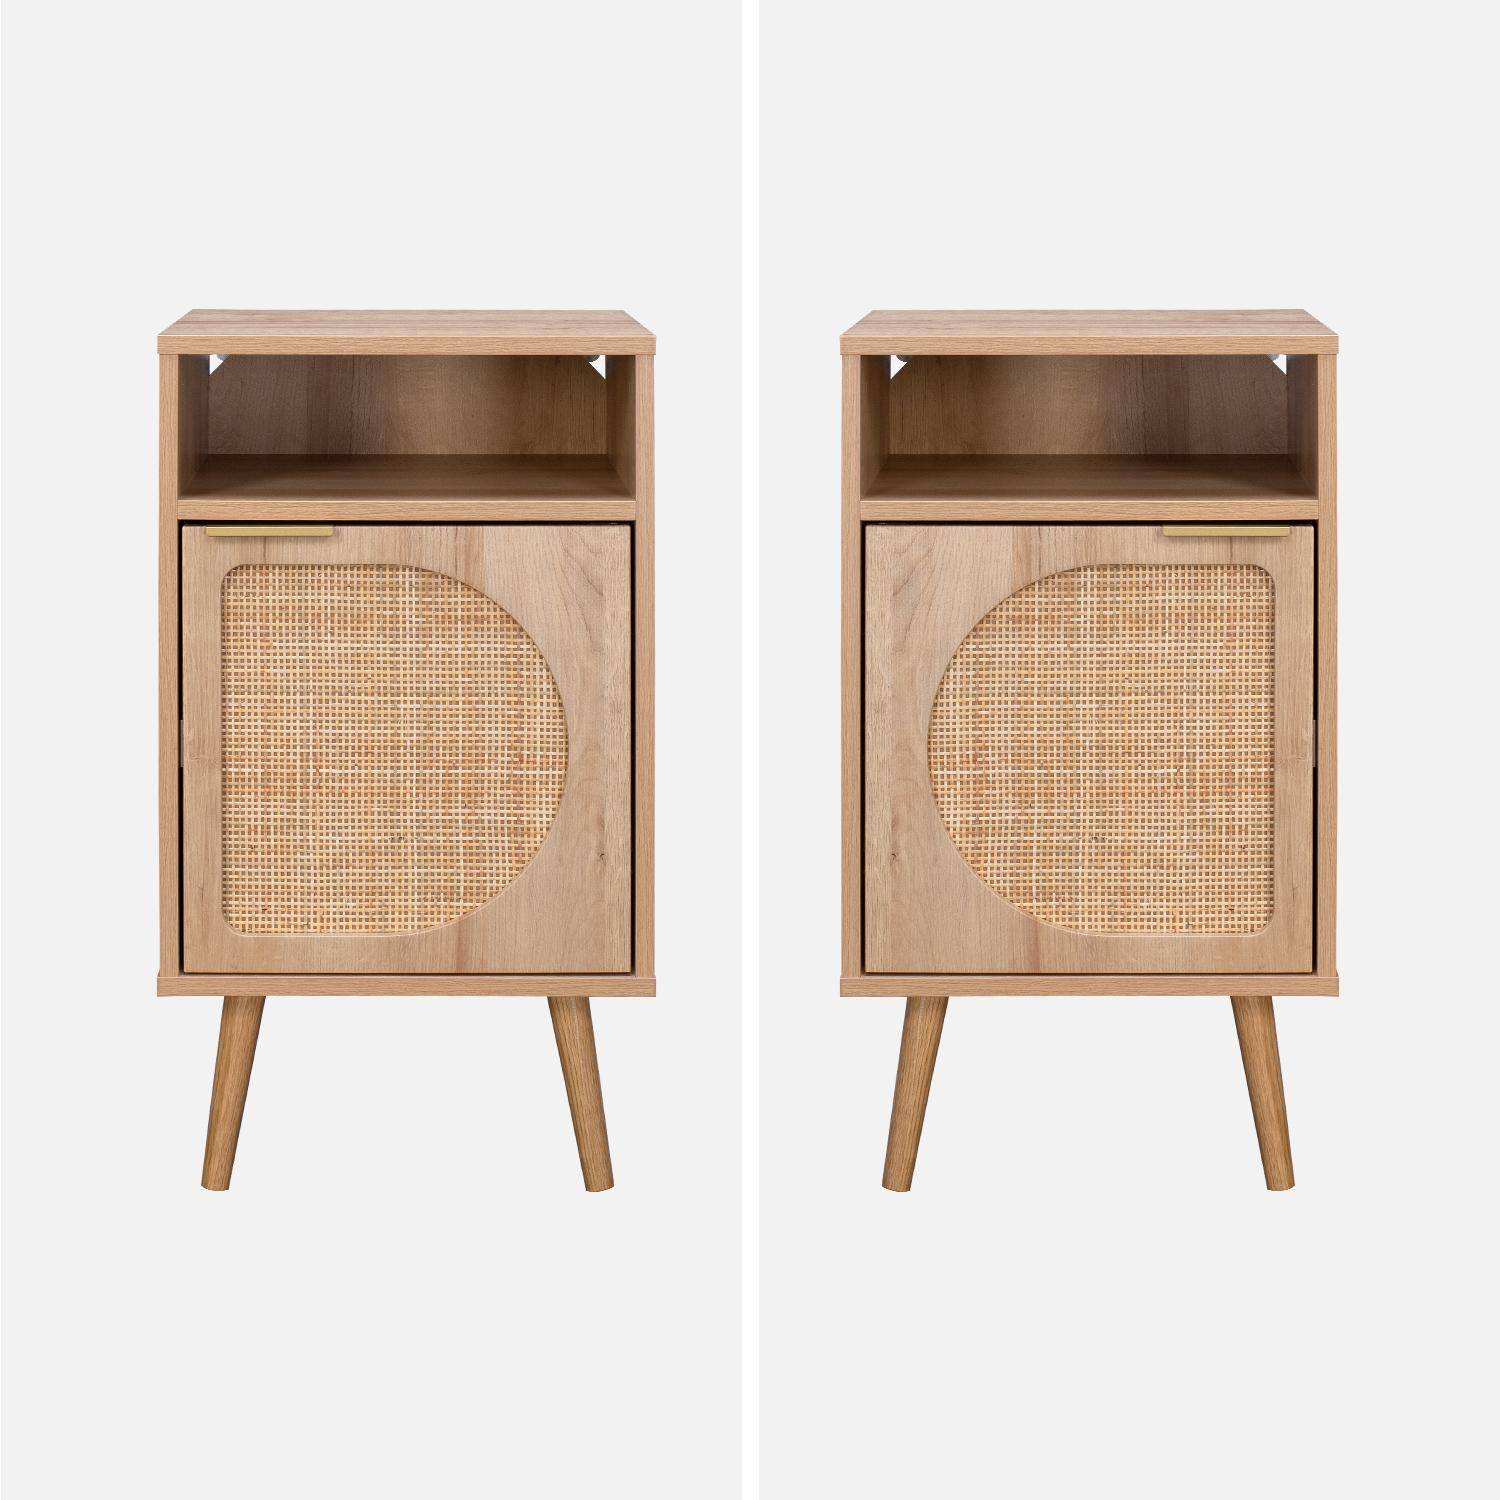 Pair of wood and rounded cane rattan bedside tables, 40x39x65.8cm, Eva, 1 cupboard, 1 storage space each,sweeek,Photo6